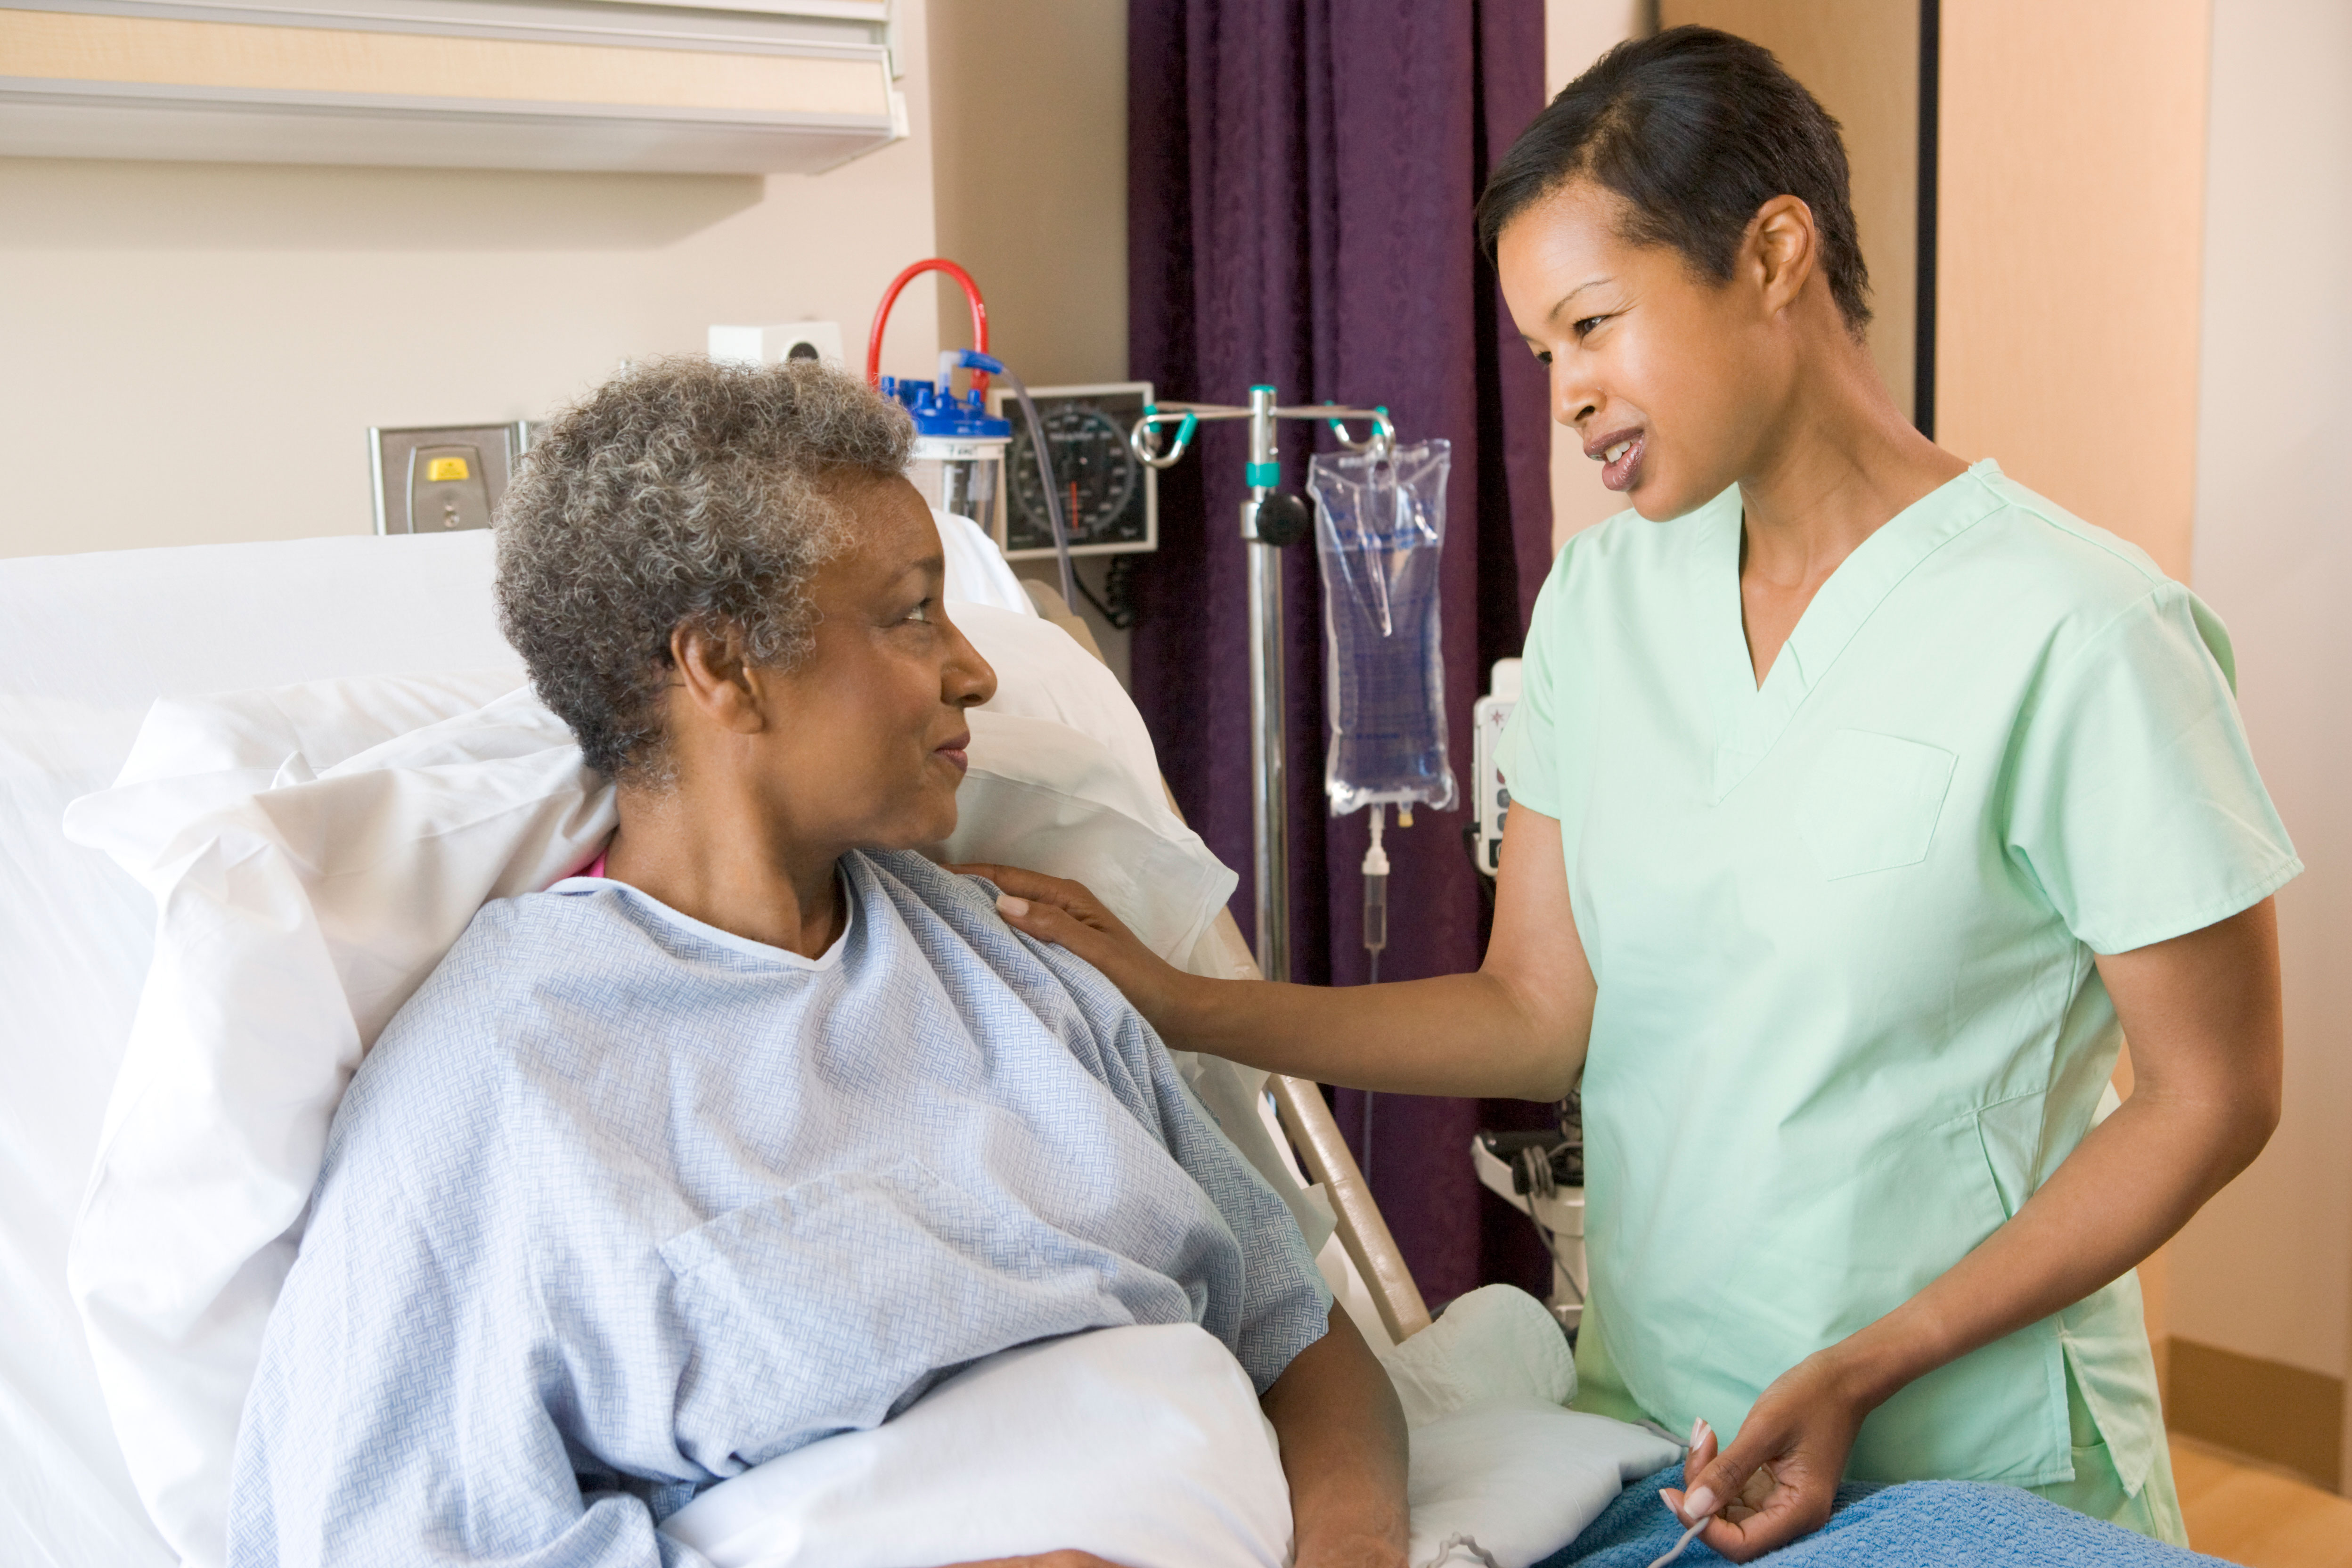 Nurse Staffing, Education Affect Patient Safety National